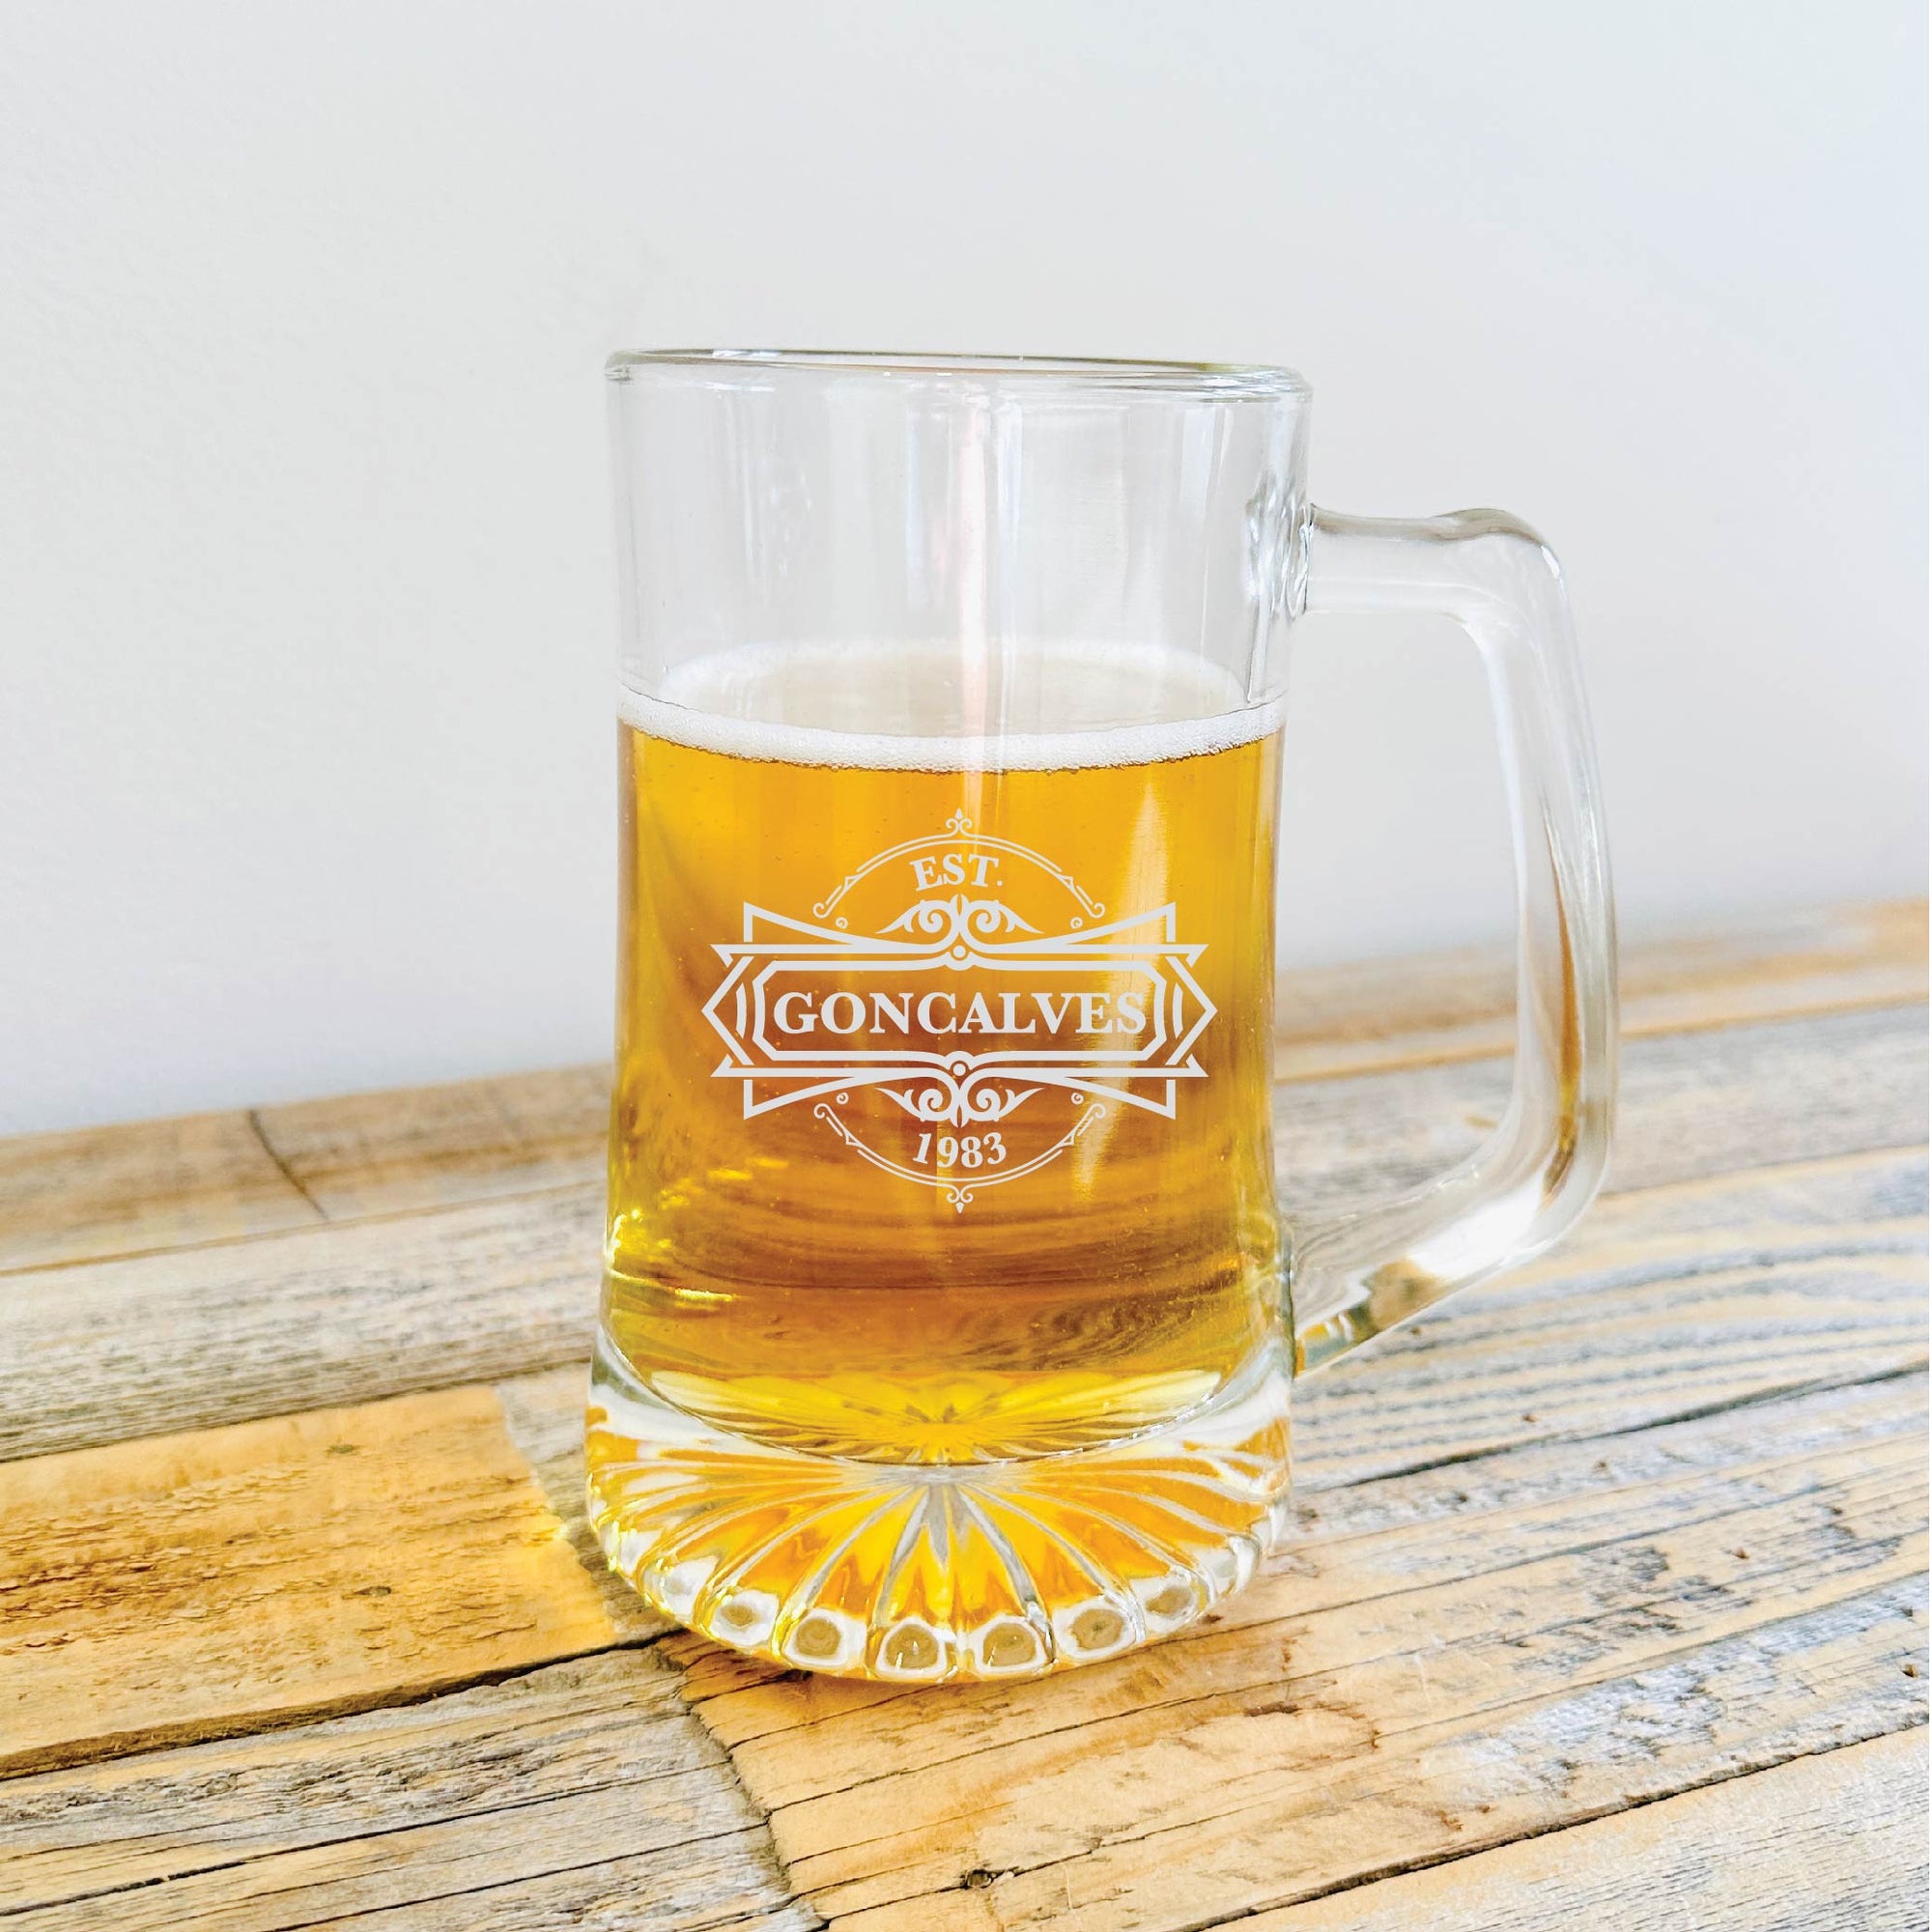 Adult Sippy Cup Pint Glass - Custom Beer Glass – GreatStuff4Me